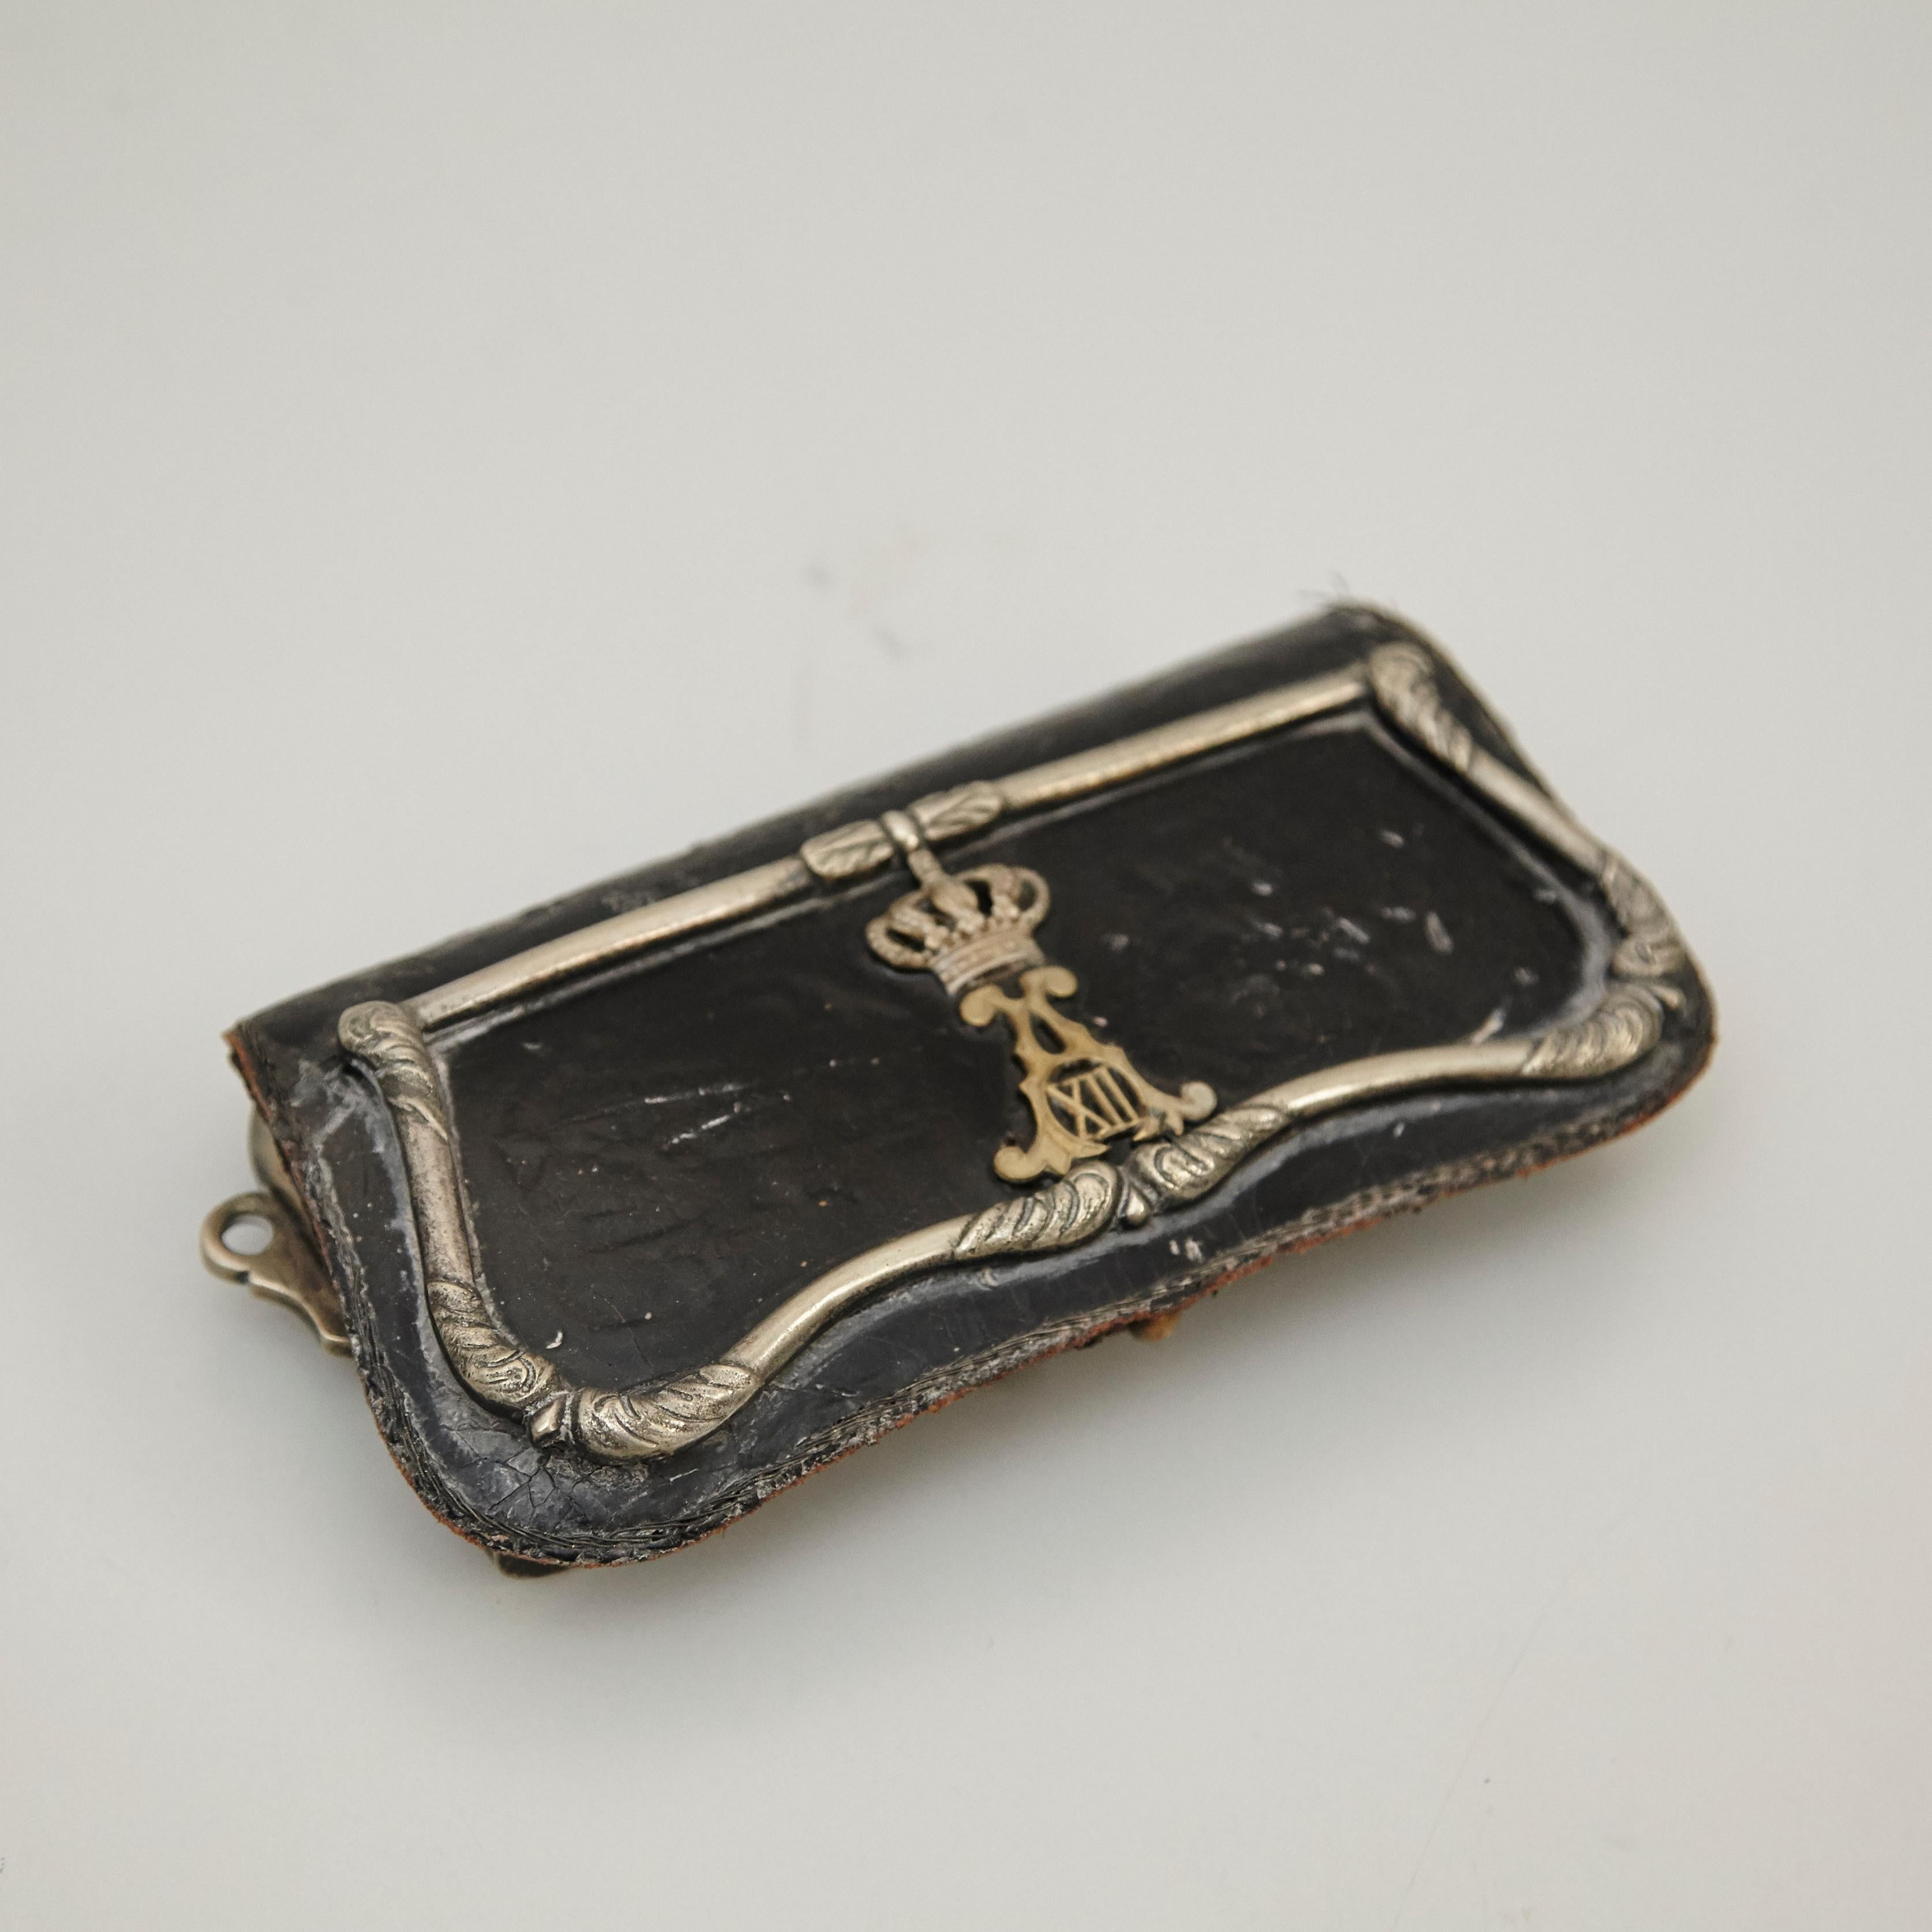 19th century Alfonso XII Cartridge holder.
By unknown manufacturer, Spain.

In original condition, with minor wear consistent with age and use, preserving a beautiful patina.

Materials:
Metal
Leather

Dimensions:
D 4 cm x W 16.5 cm x H